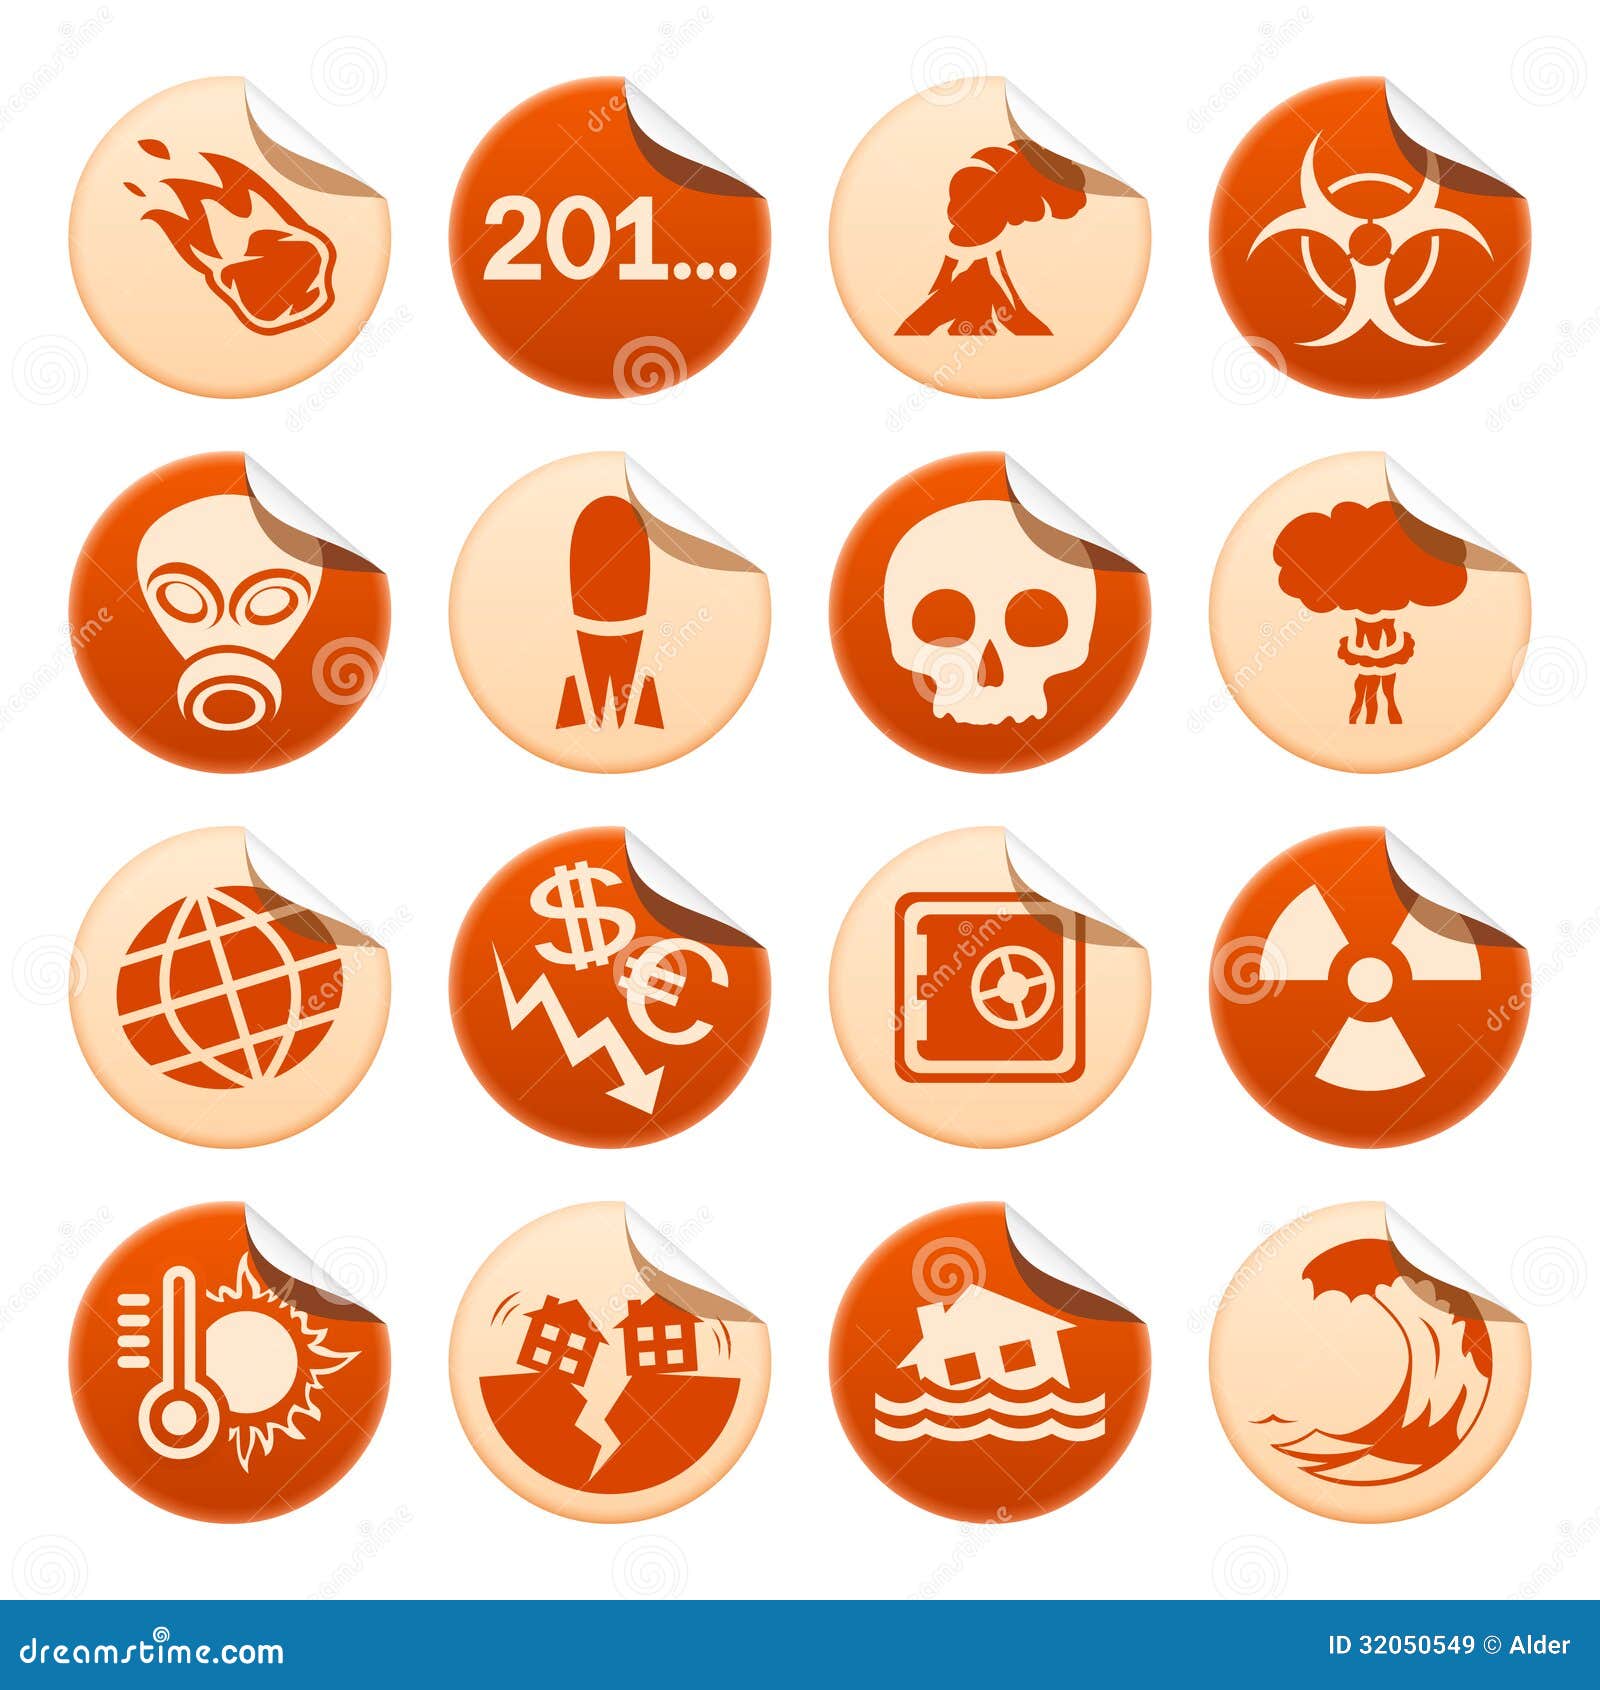 apocalyptic and natural disasters stickers